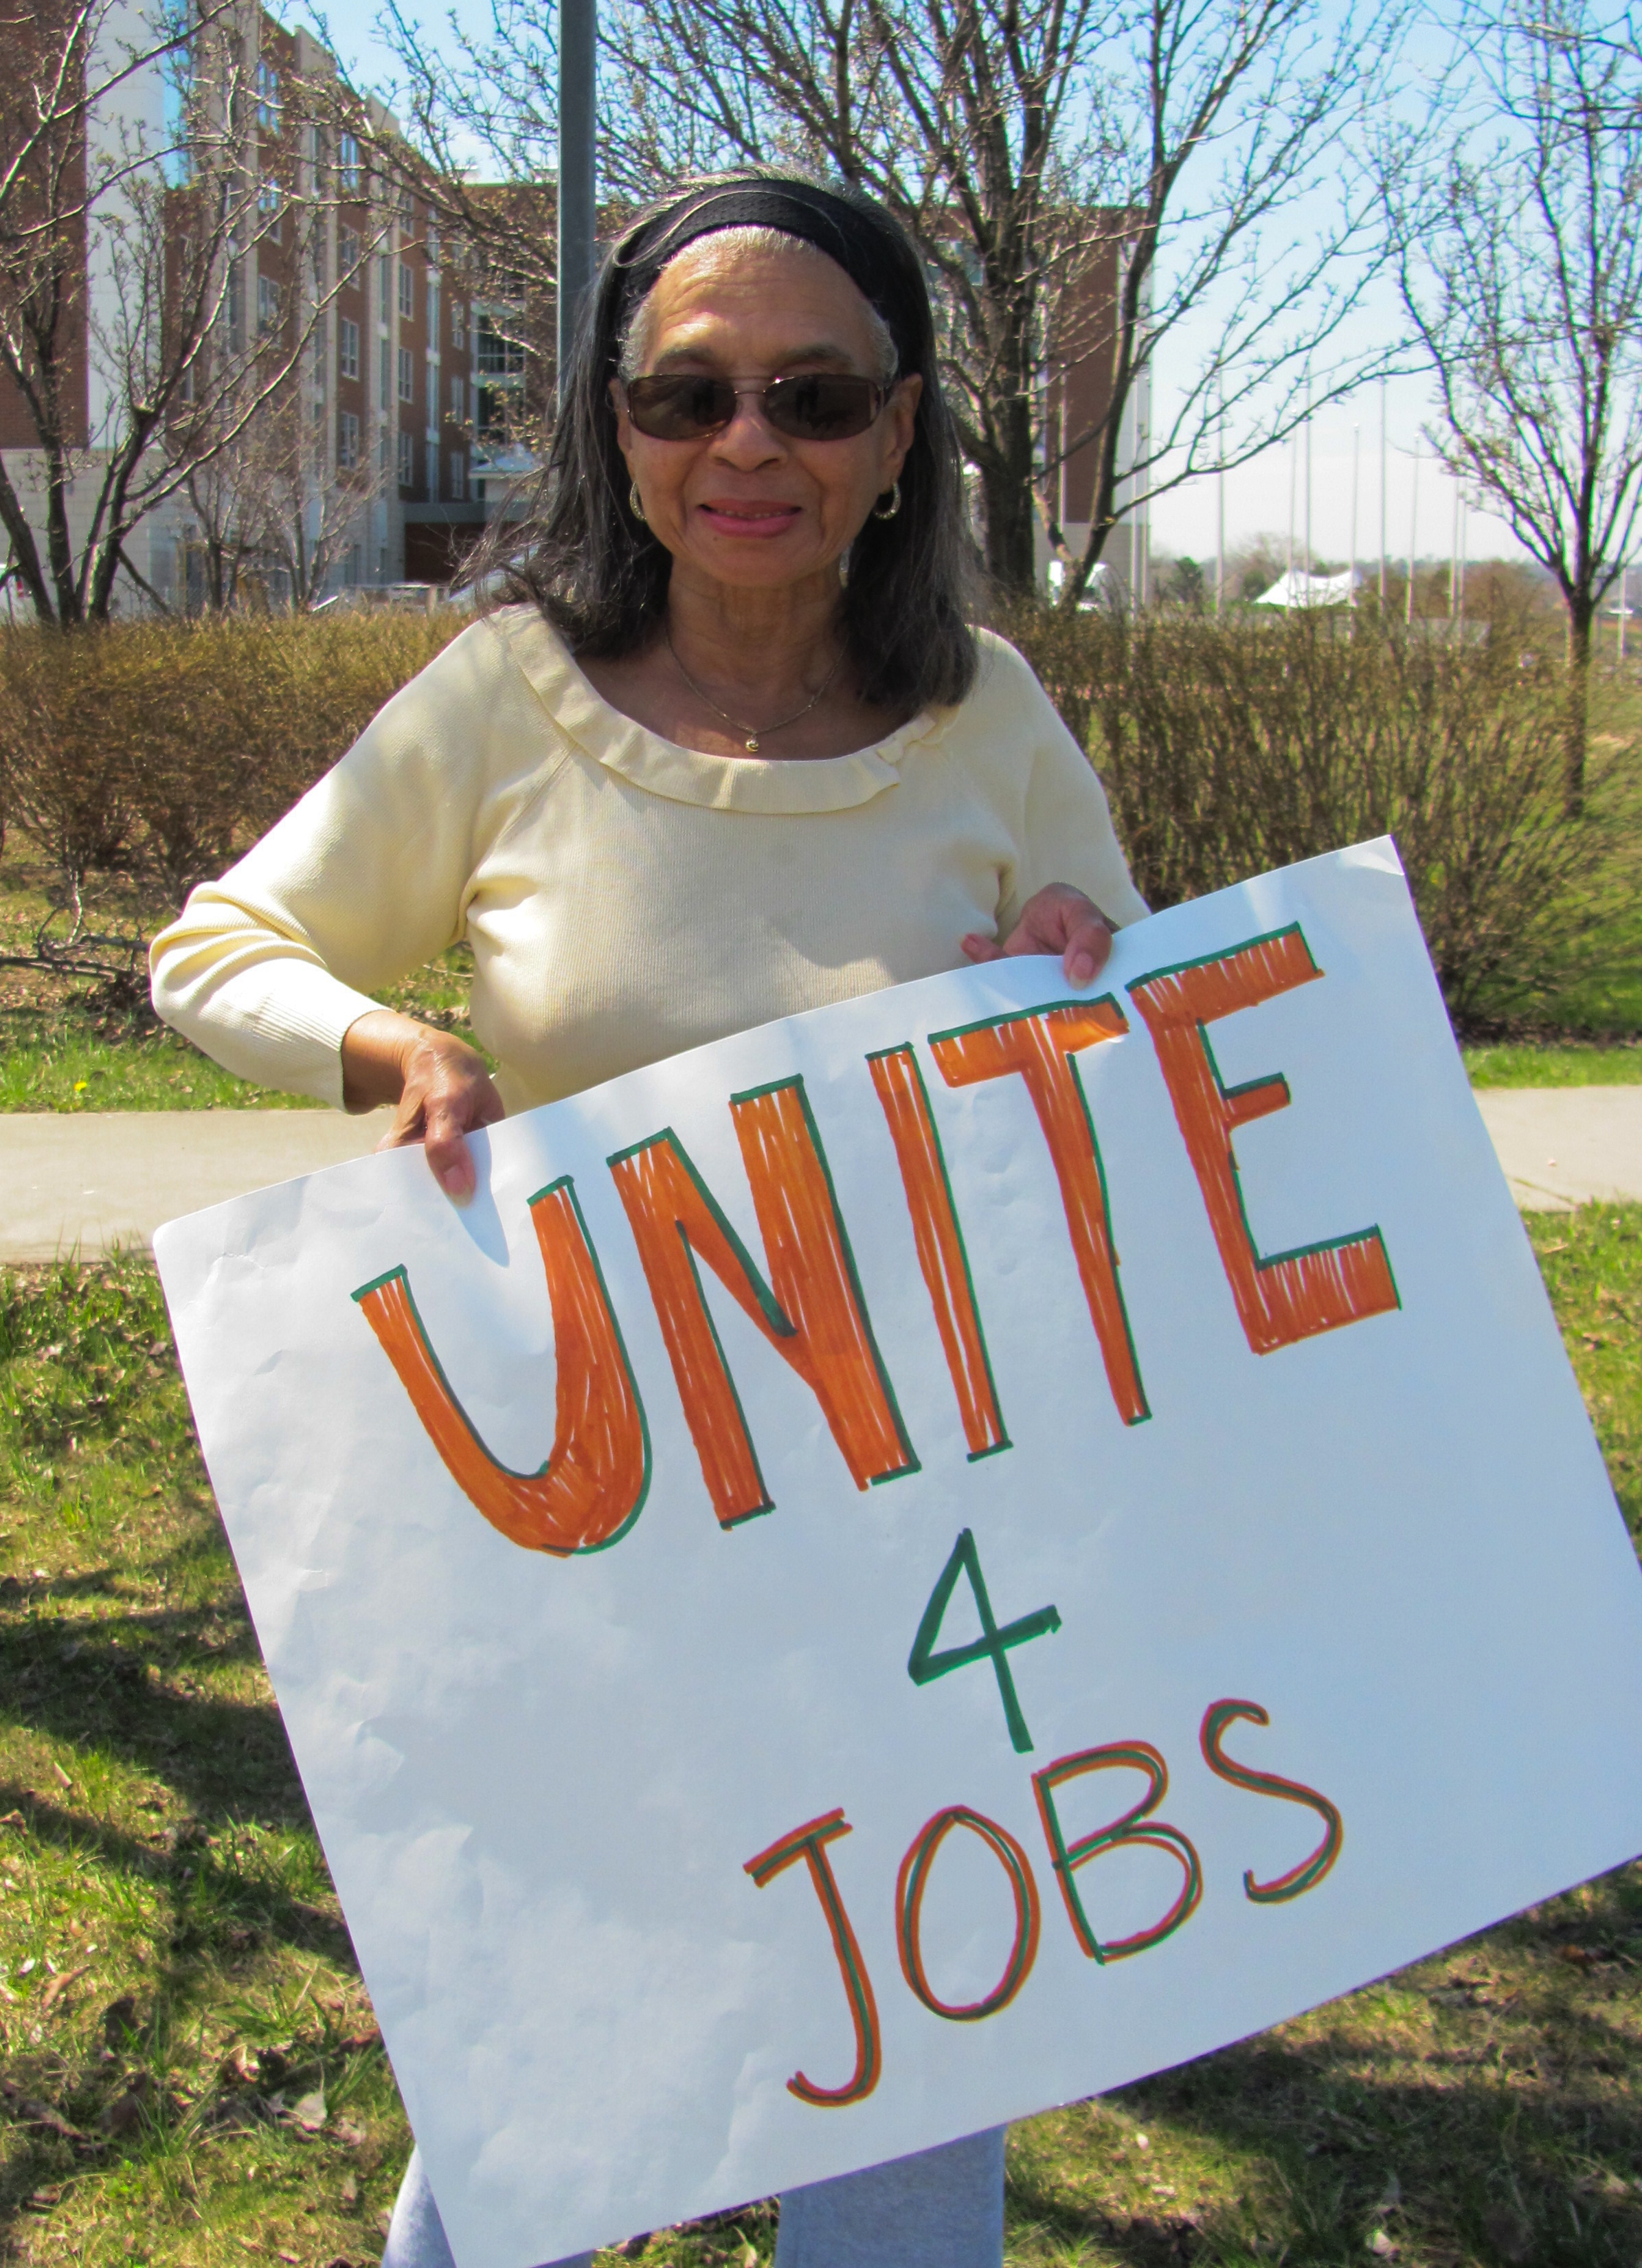 Aggie Lane holding sign that reads, "Unite for Jobs"